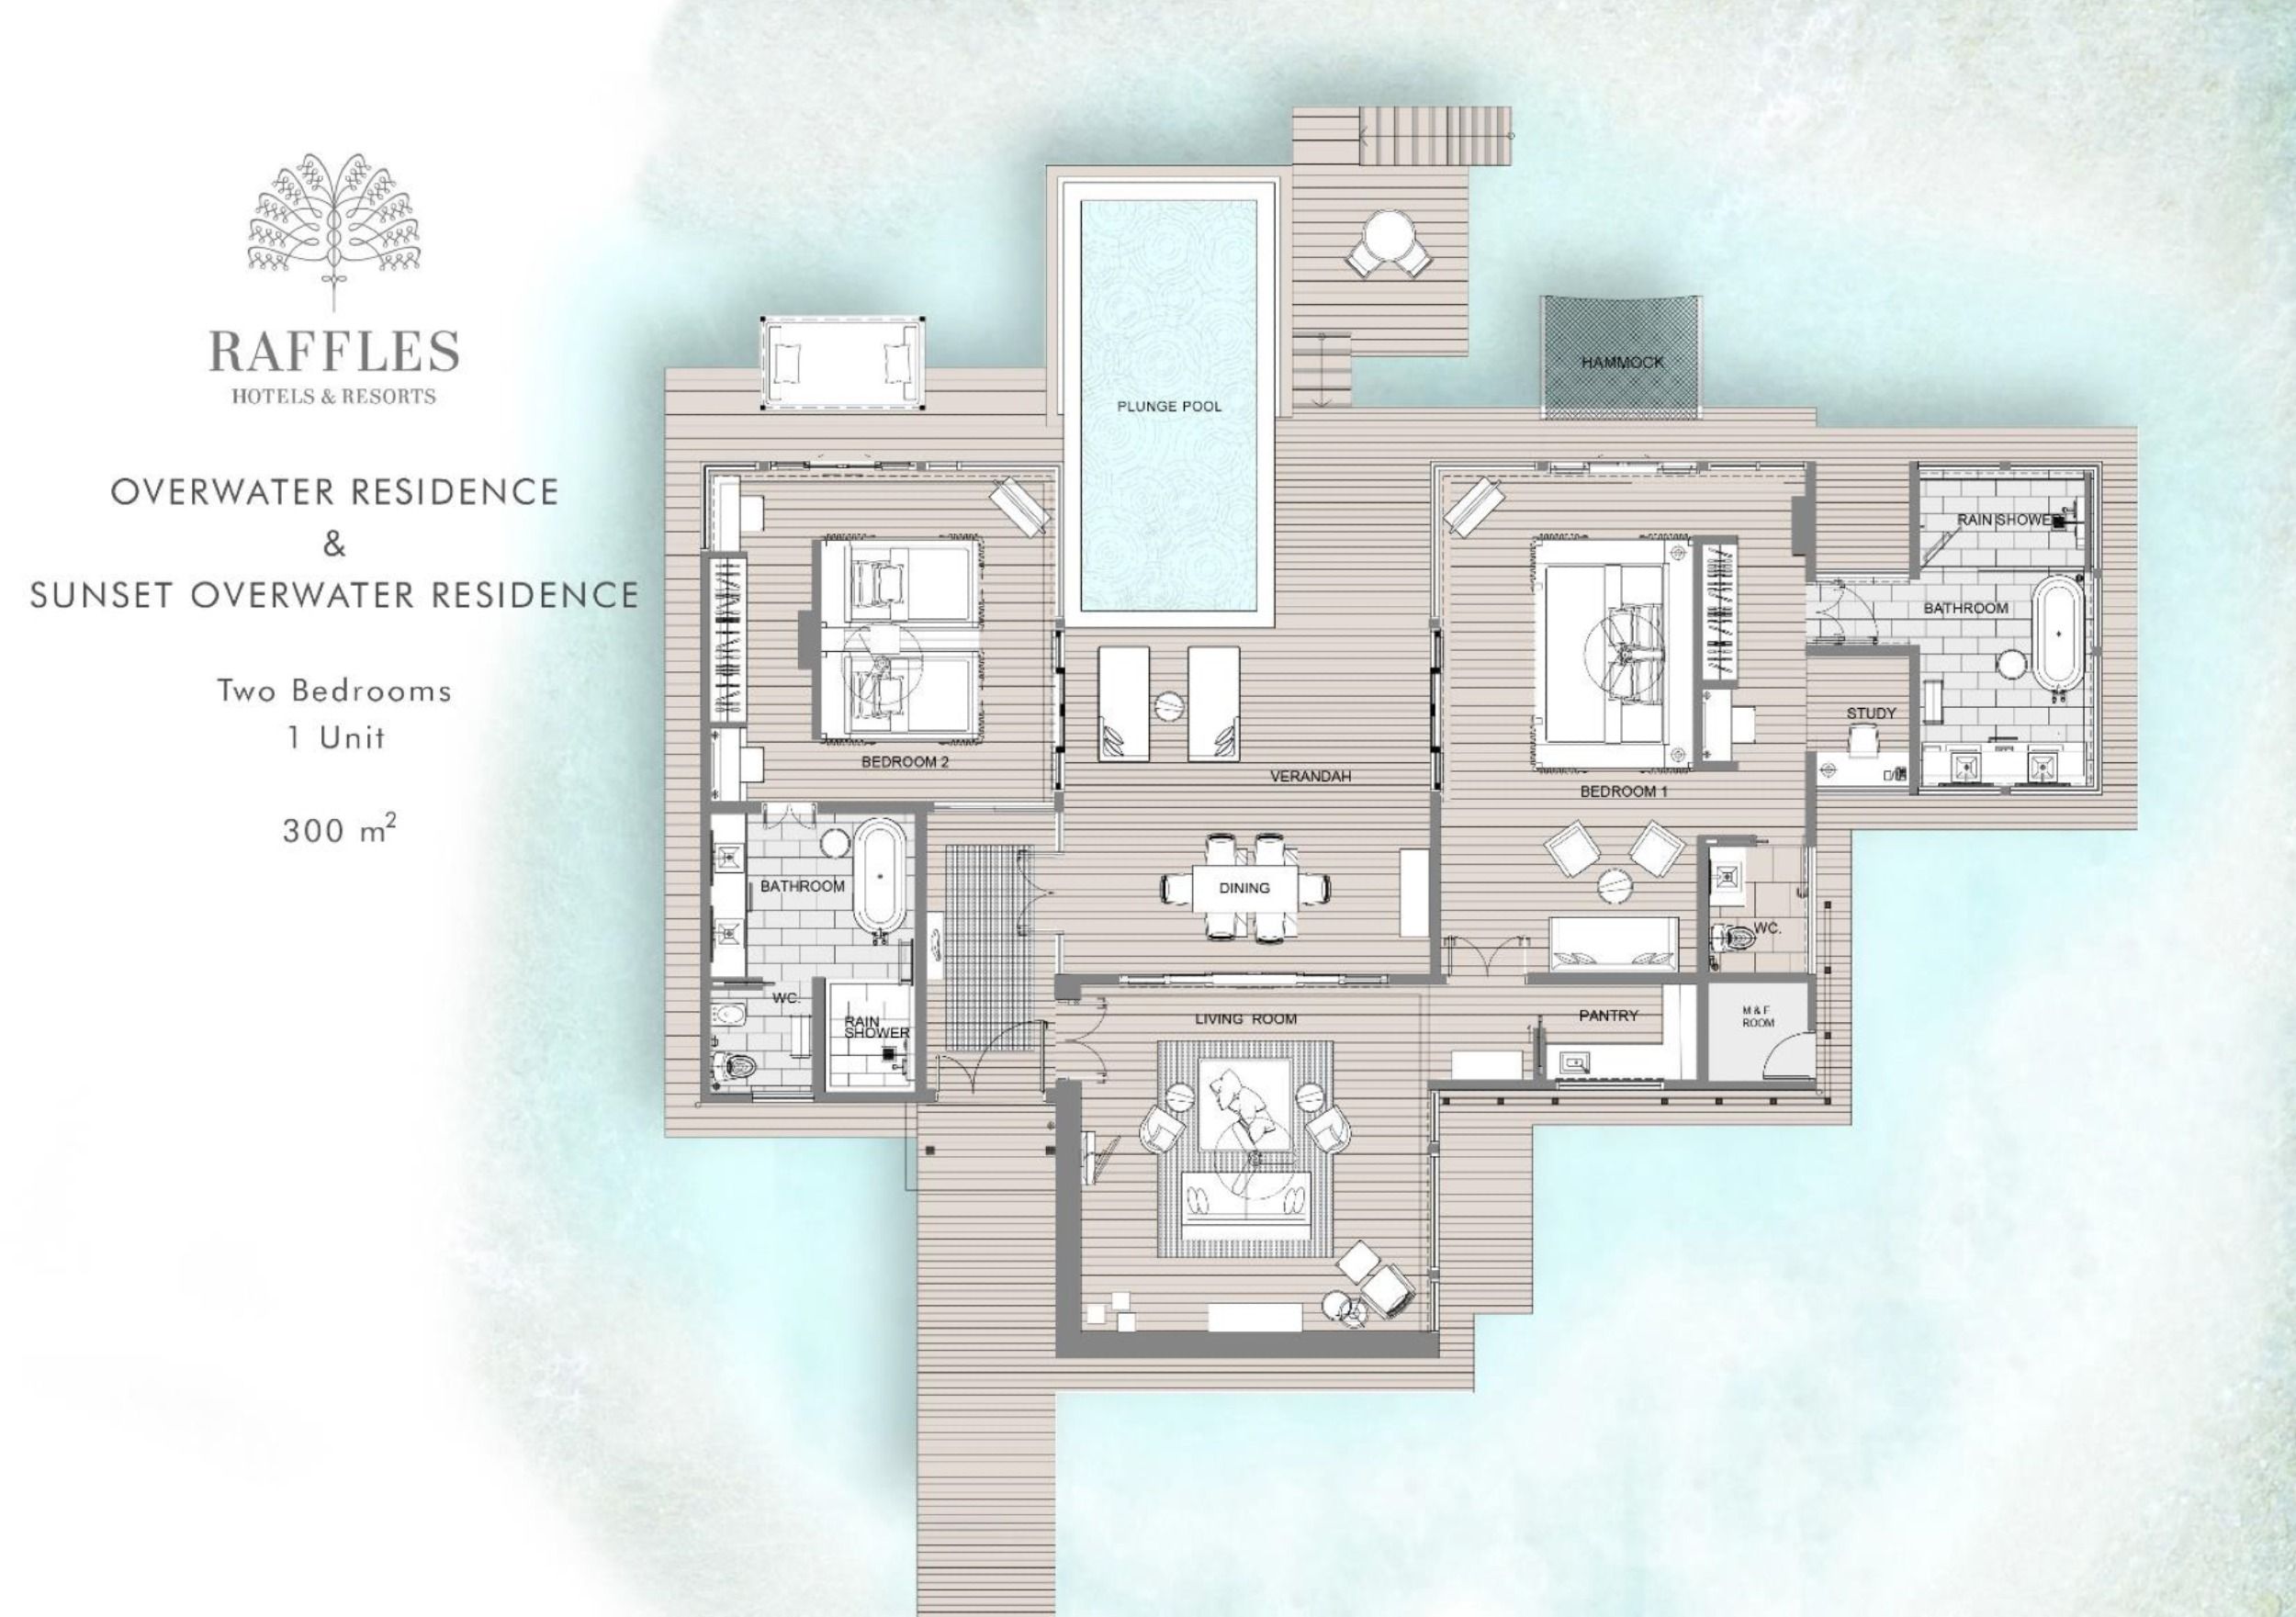 Raffles Maldives Sunset Overwater Residence with Pool Two Bedroom Floor Plan 